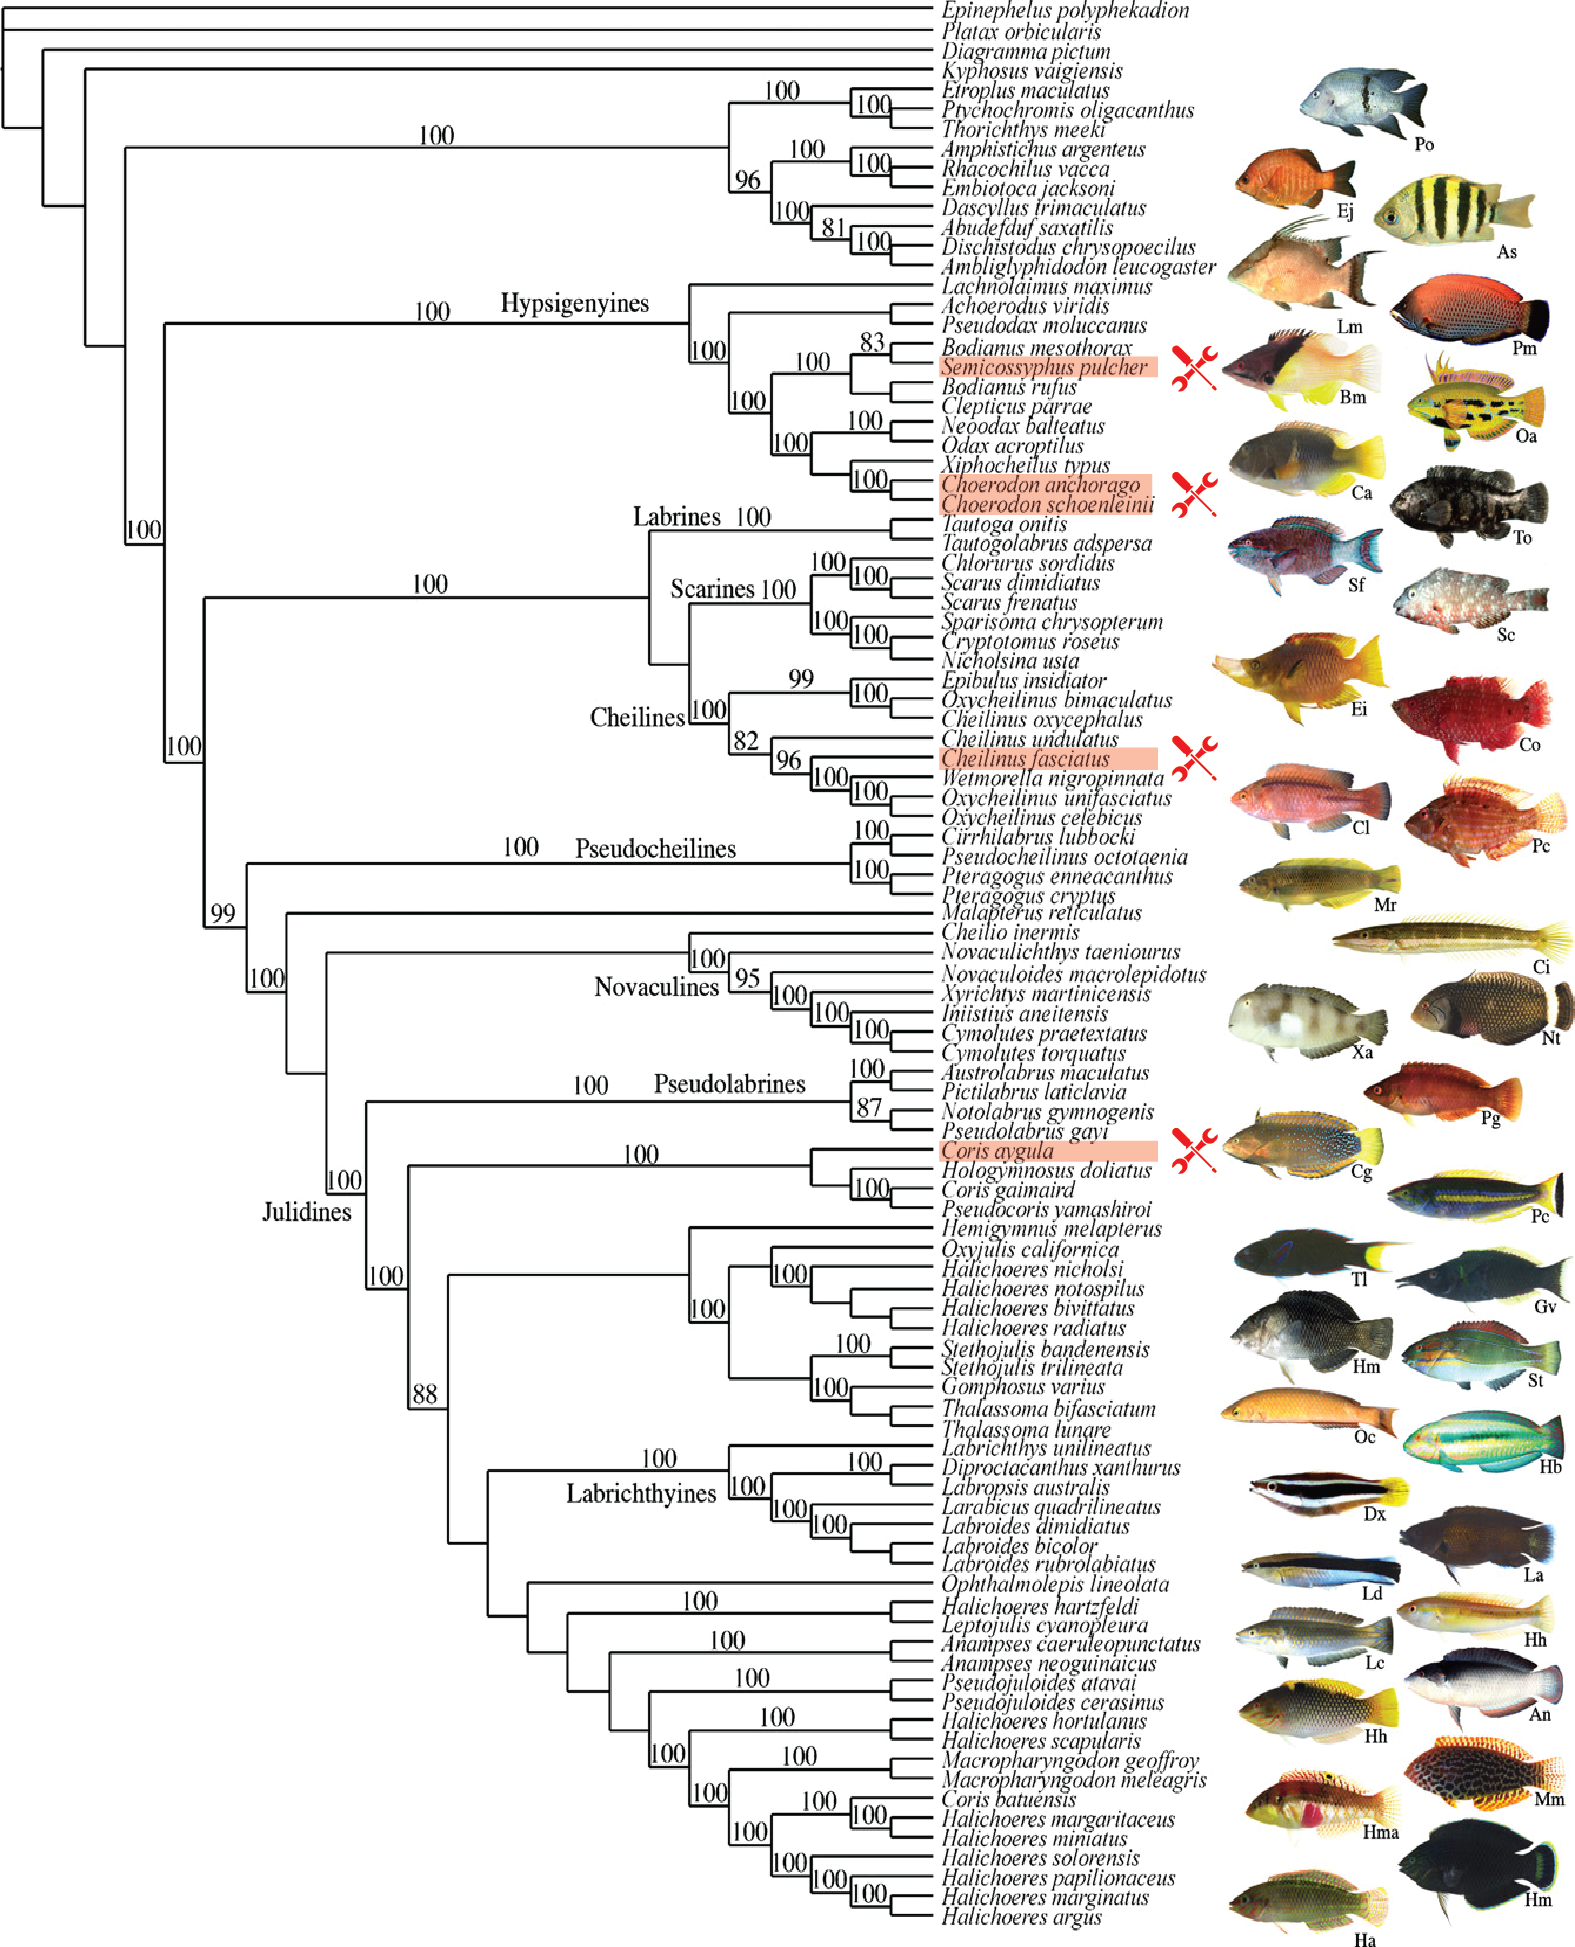 Anvil use in the Labridae phylogeny